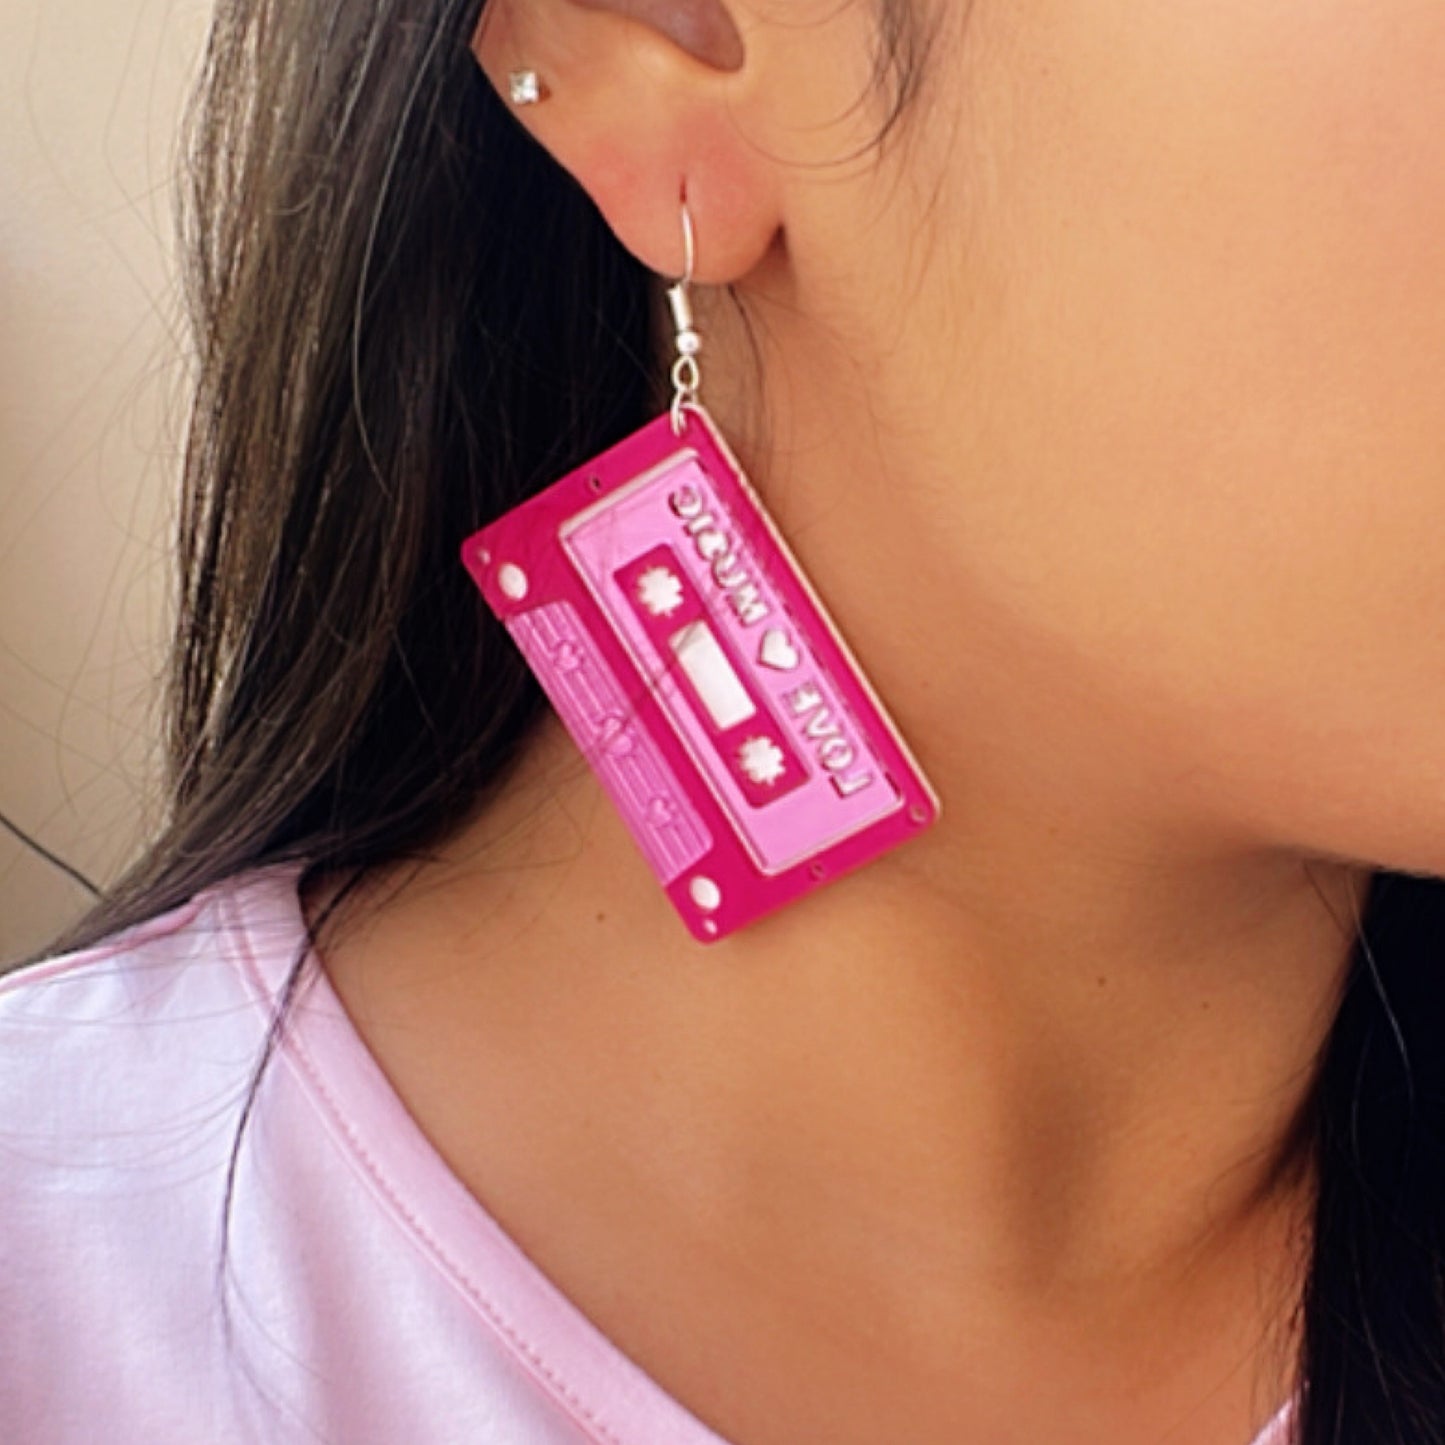 Love Cassette Earrings - Glossy Pink and White - Nian by Nidhi - worn by a woman